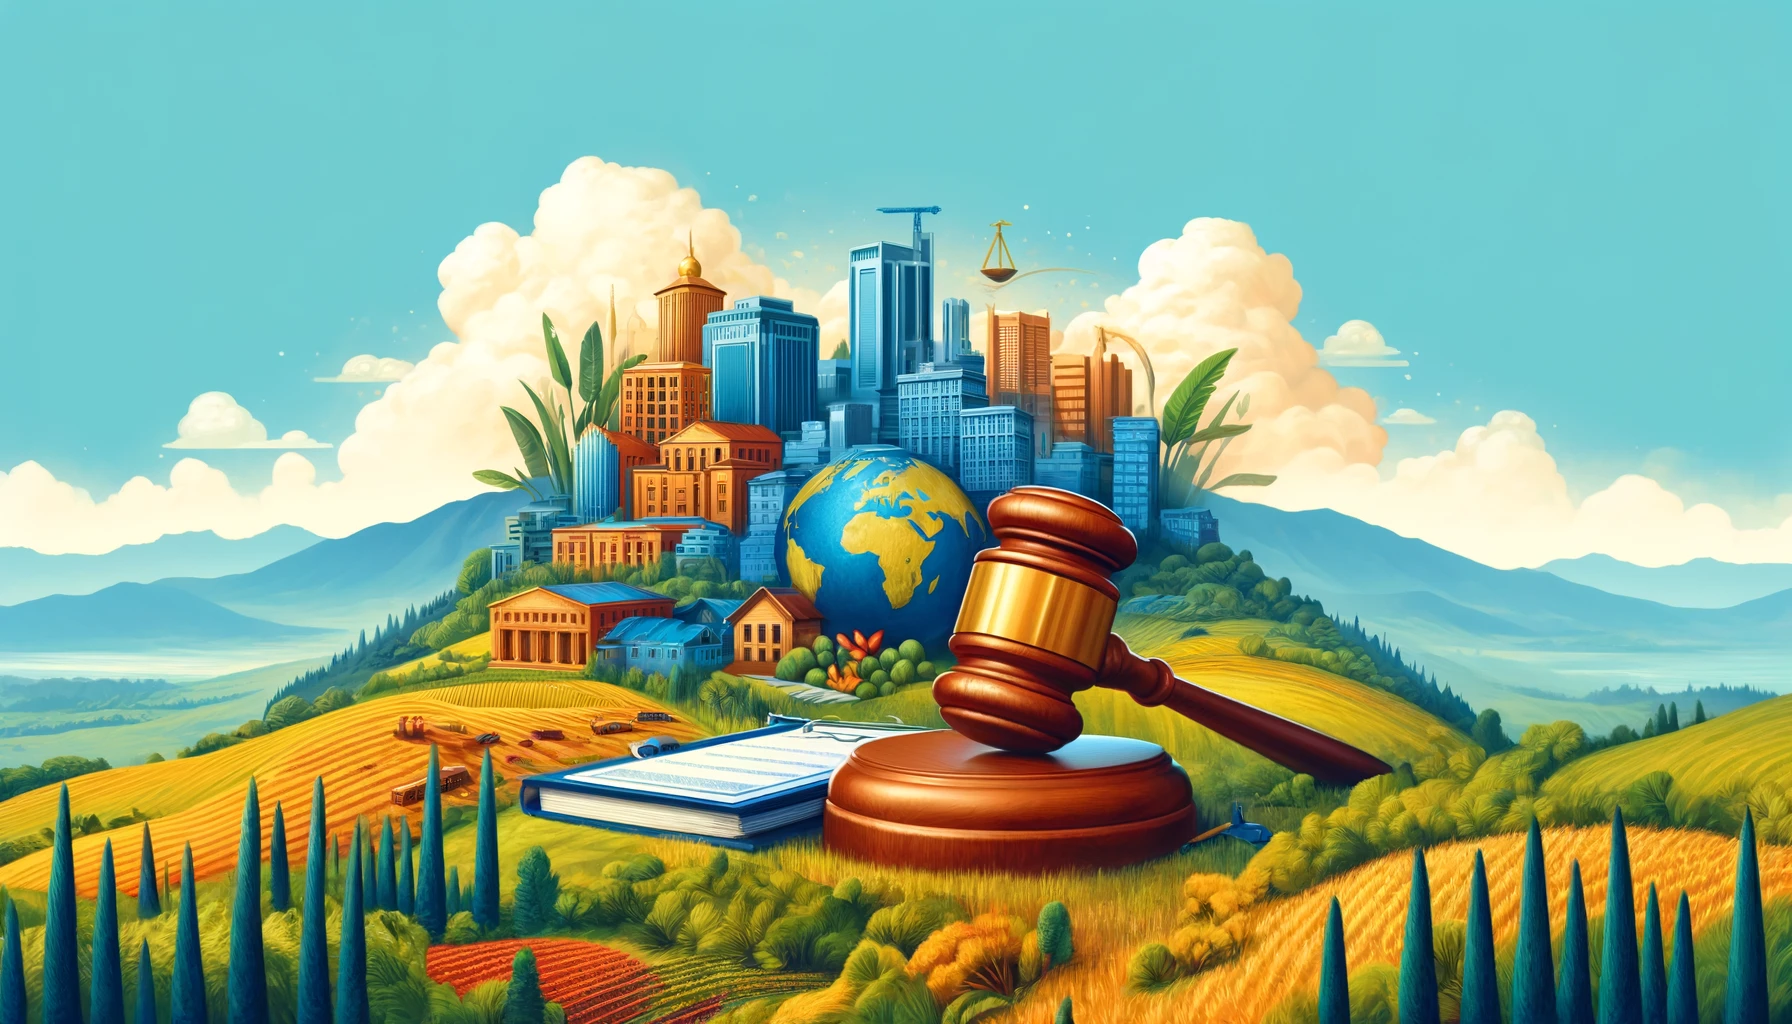 Featured image showing Rwandan landscapes with business regulation symbols like documents and a gavel, representing Rwanda's business environment.Rwanda business landscape, Kigali cityscape, business regulations in Rwanda, Rwandan hills, legal symbols, business in Rwanda, Rwanda regulatory guid